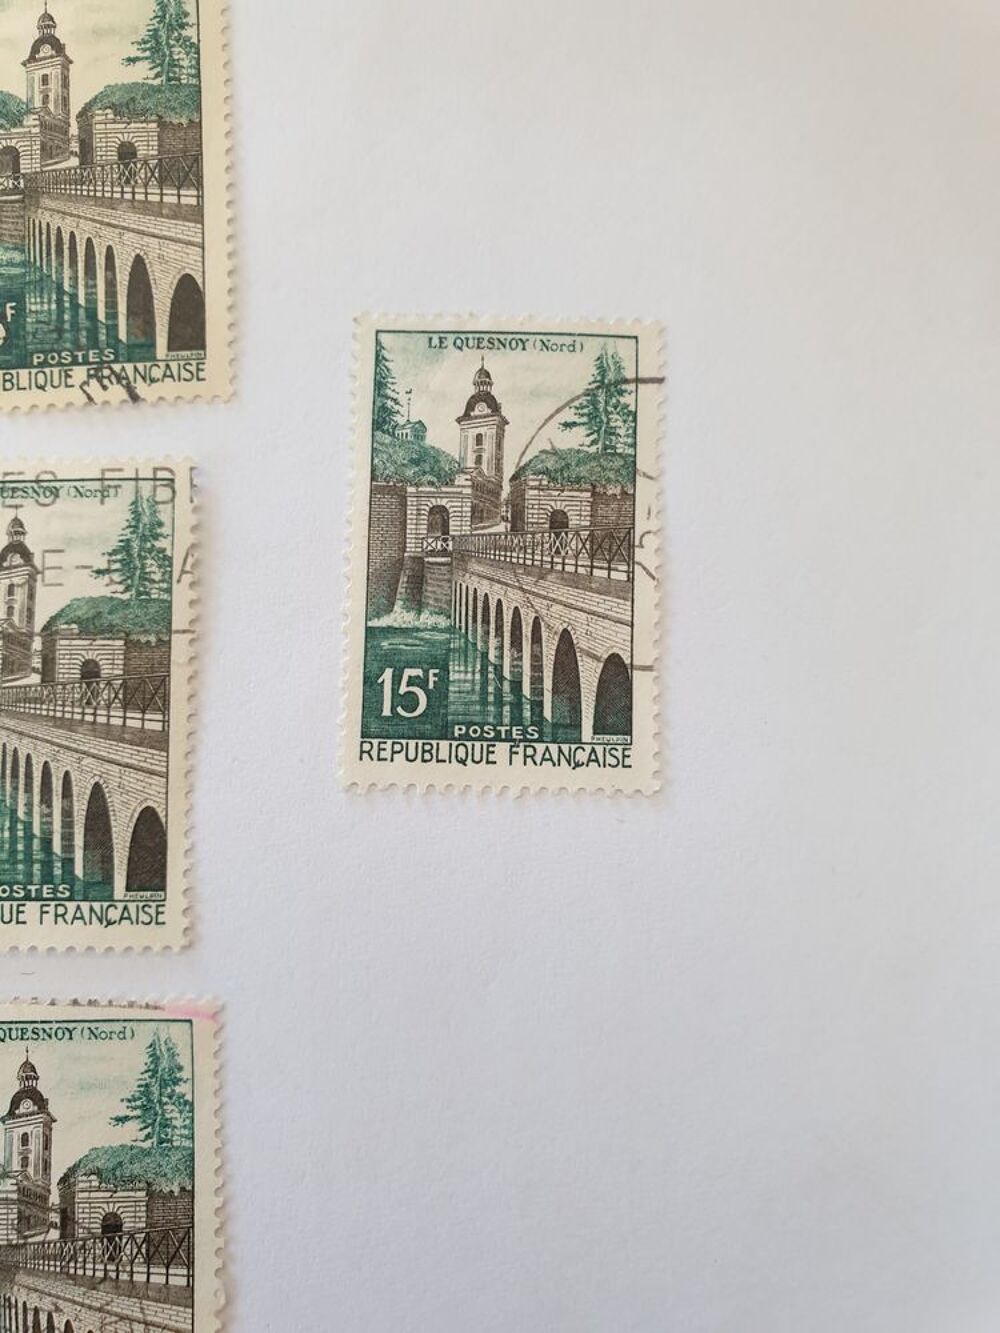 Timbre France 1957 Le Quesnoy (Nord) 15 F lot 0..50 euro 